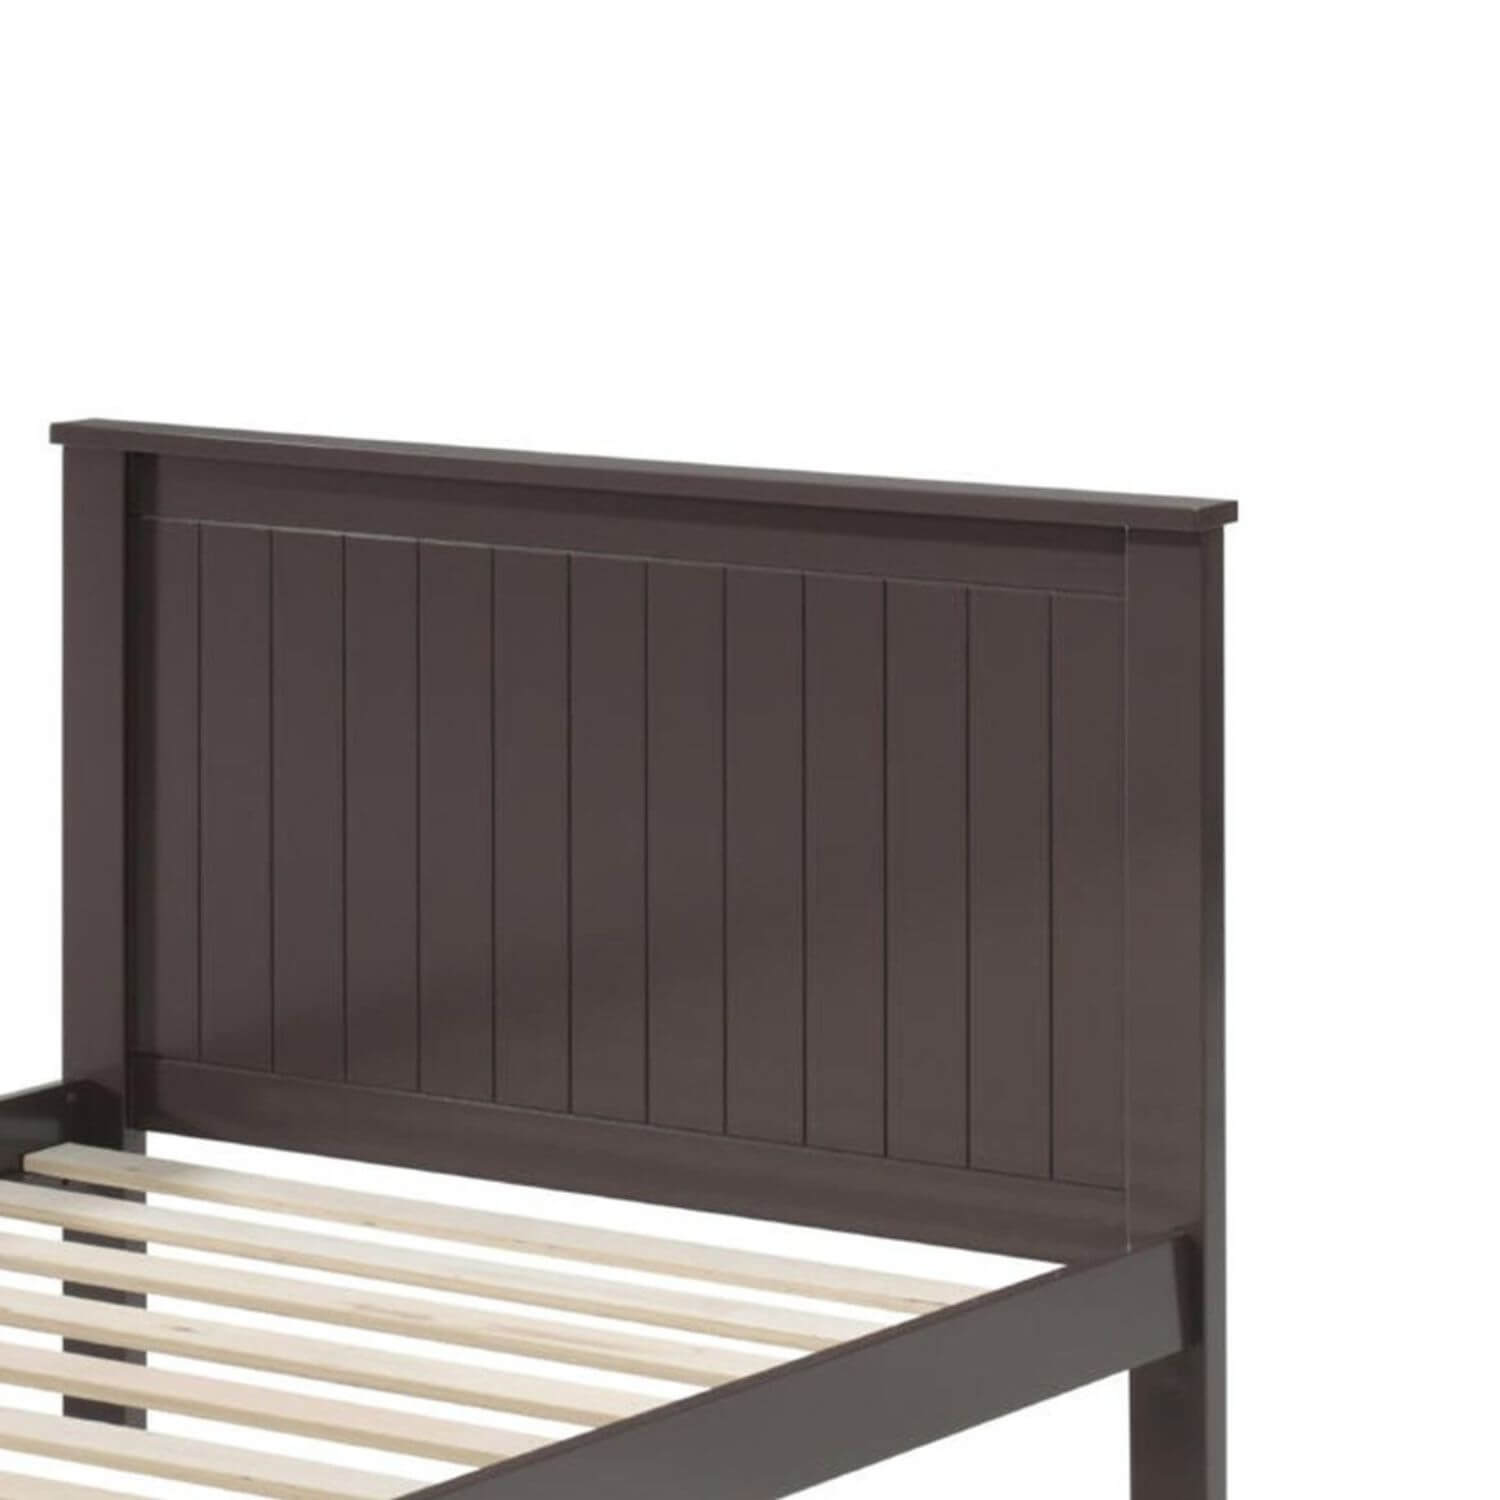 ACME Bungalow Twin Panel Bed | Chocolate